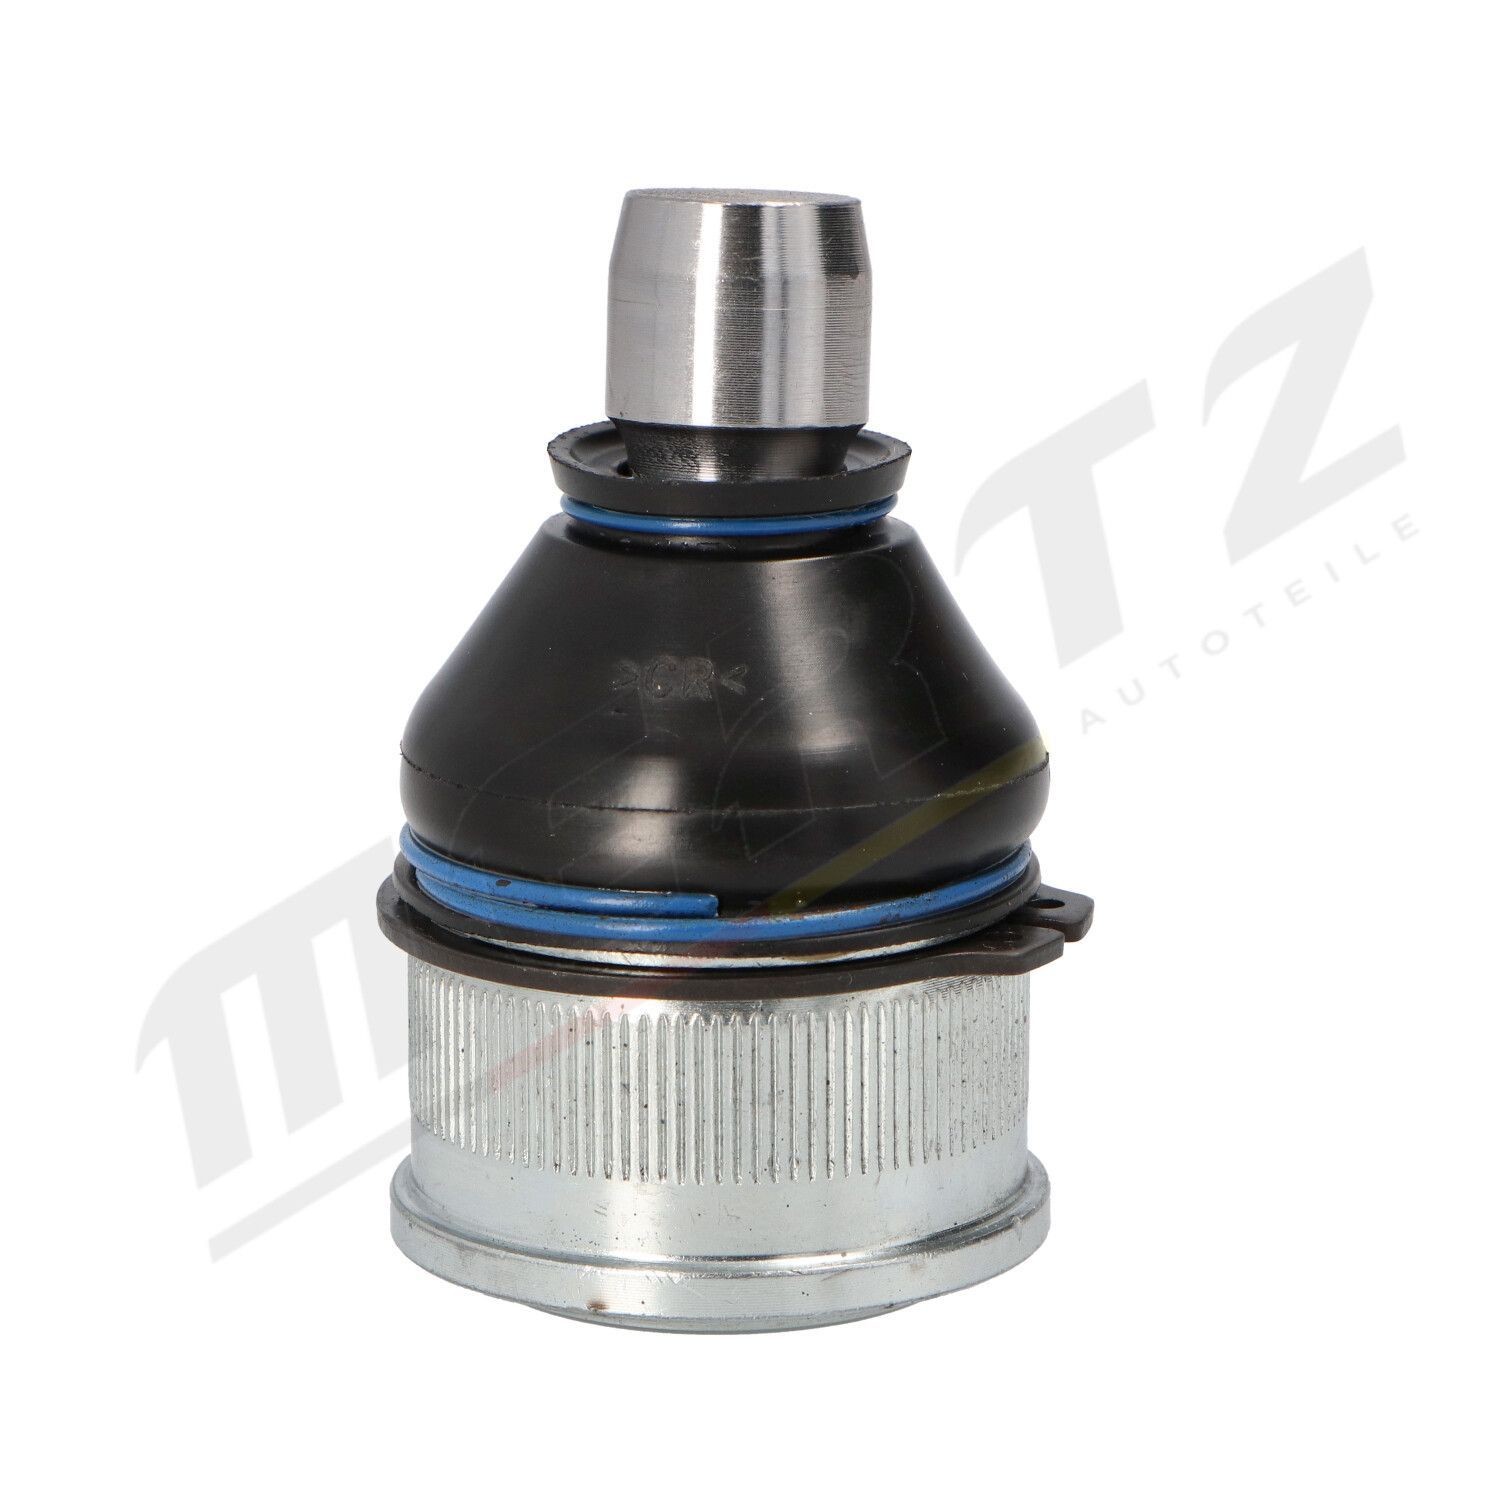 Mazda Ball Joint MERTZ M-S0529 at a good price